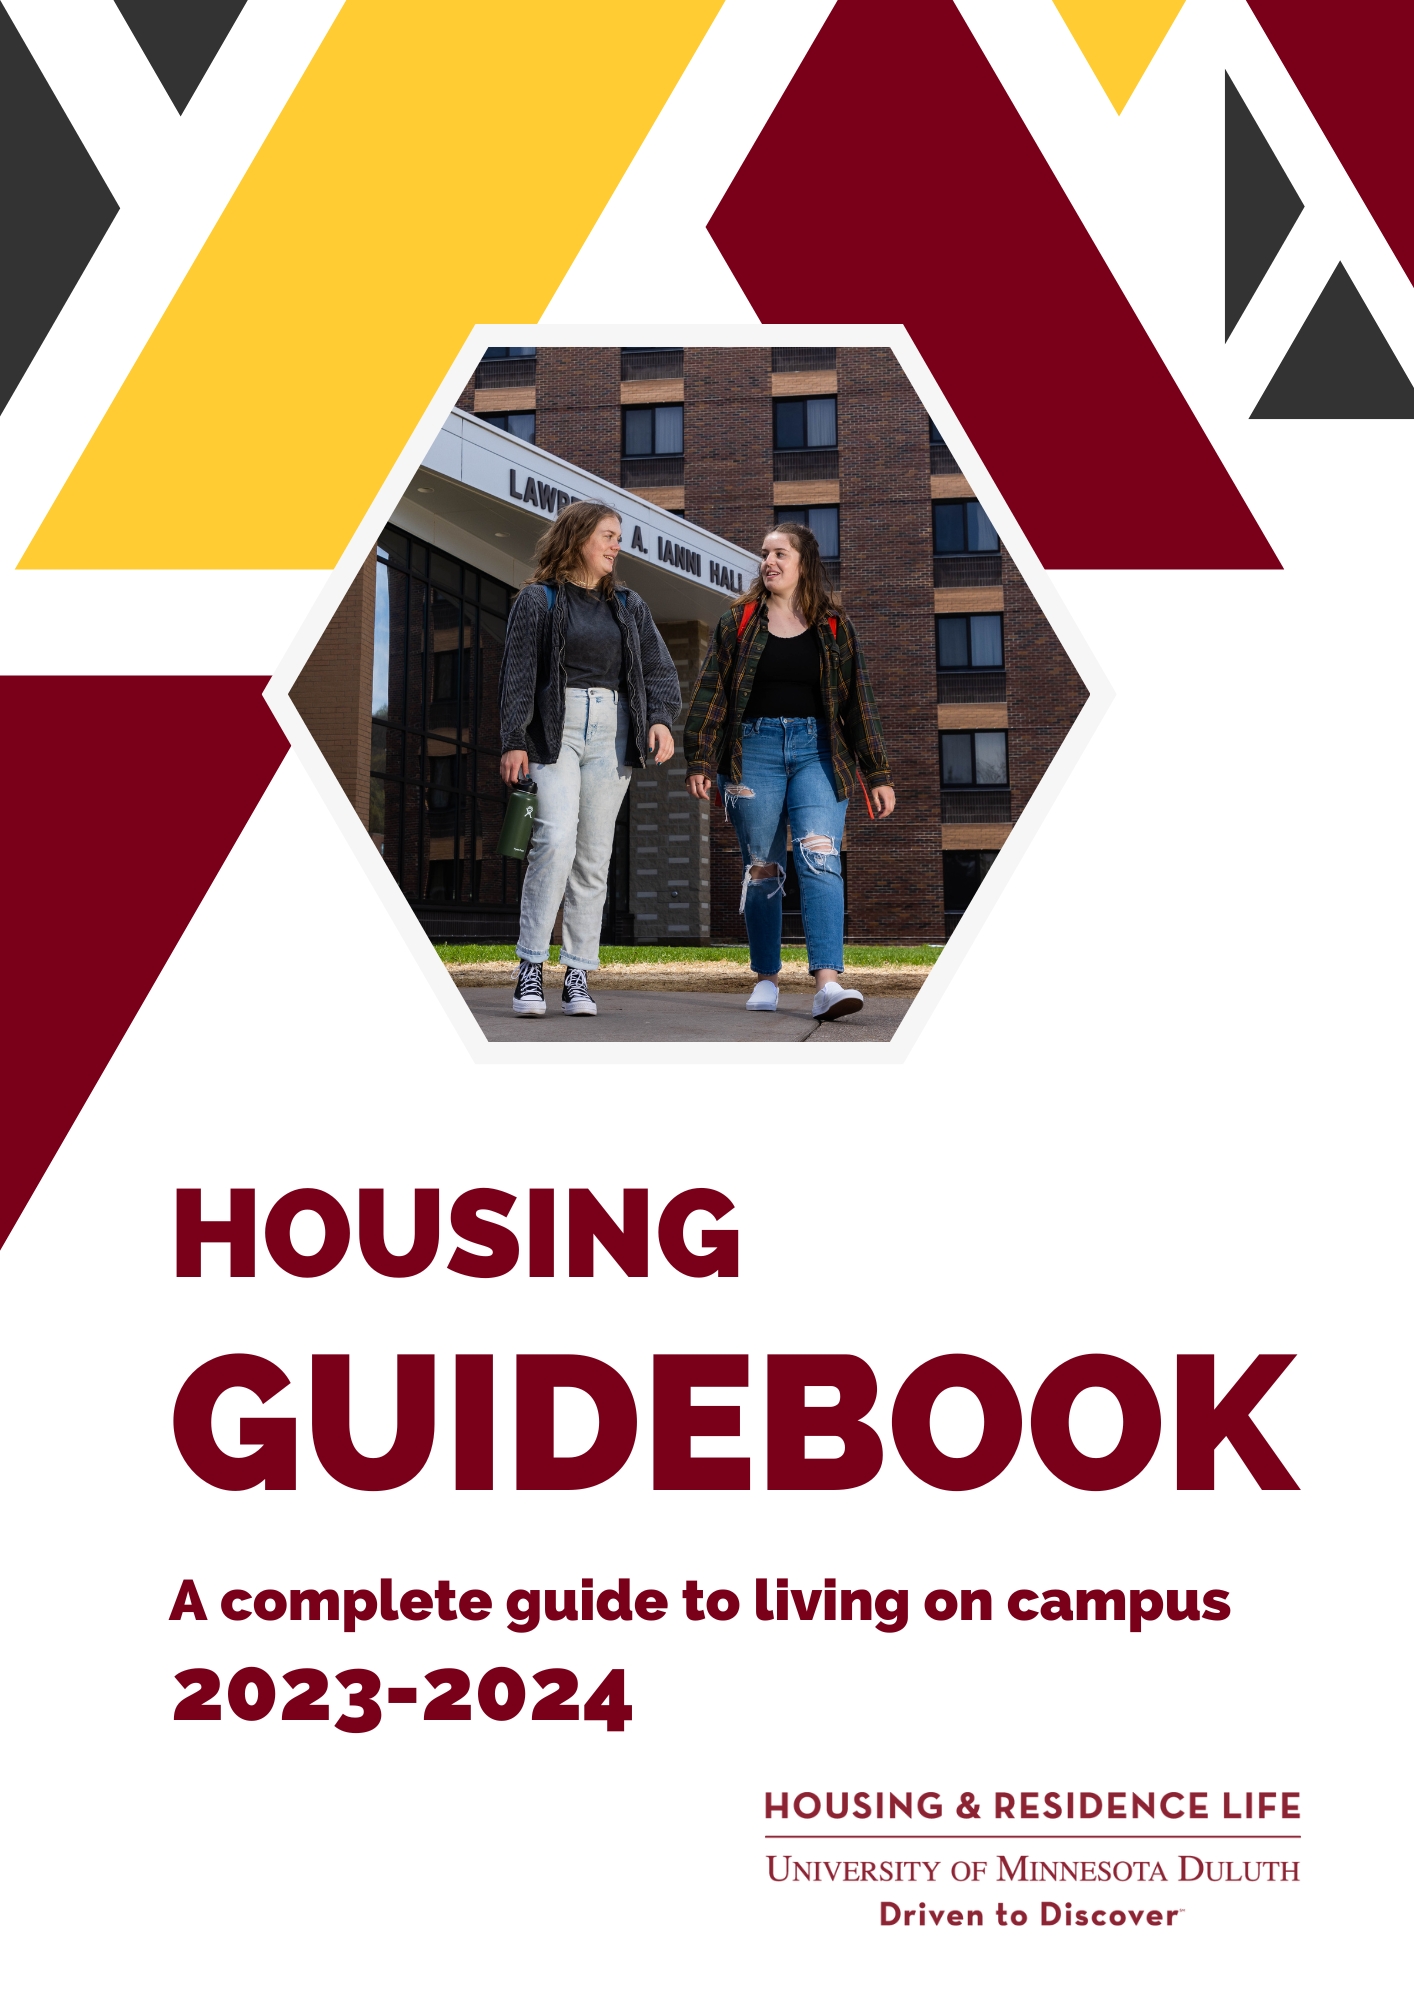 Cover of Housing Guidebook: A complete guide to living on campus. 2023-2024. Two students walking with Ianni Hall in the background